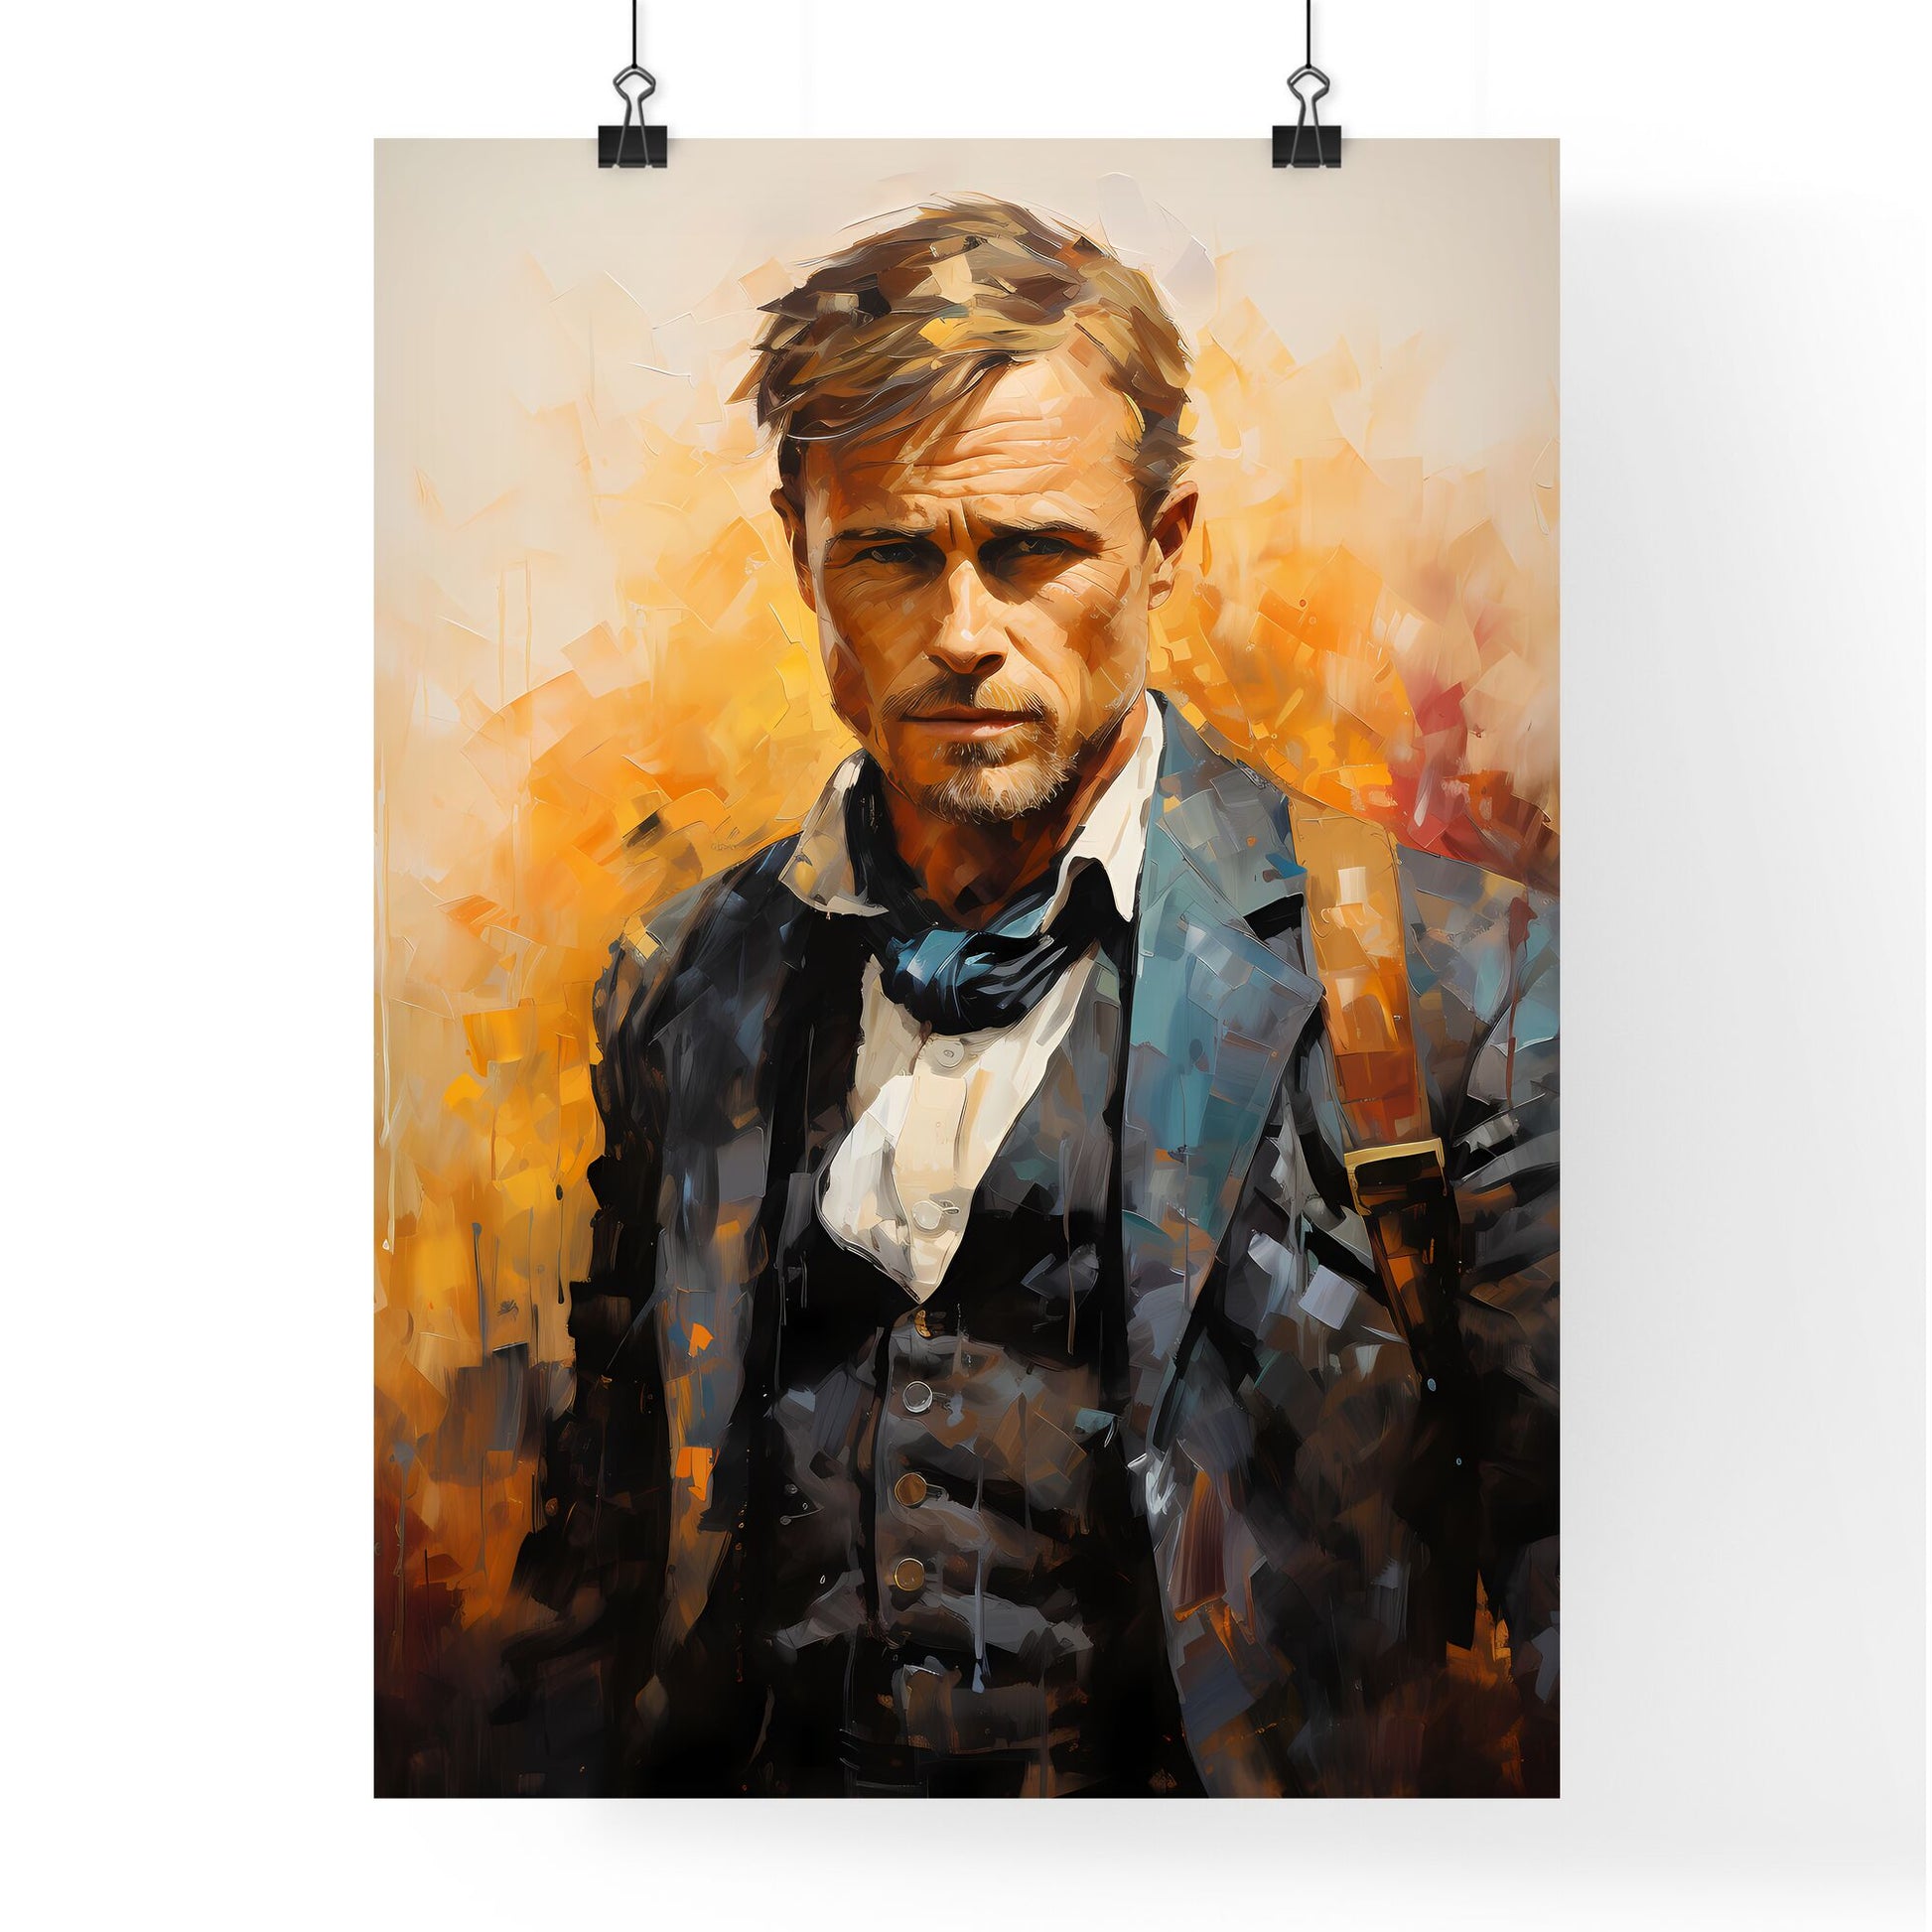 Butch Cassidy - A Painting Of A Man In A Suit Default Title